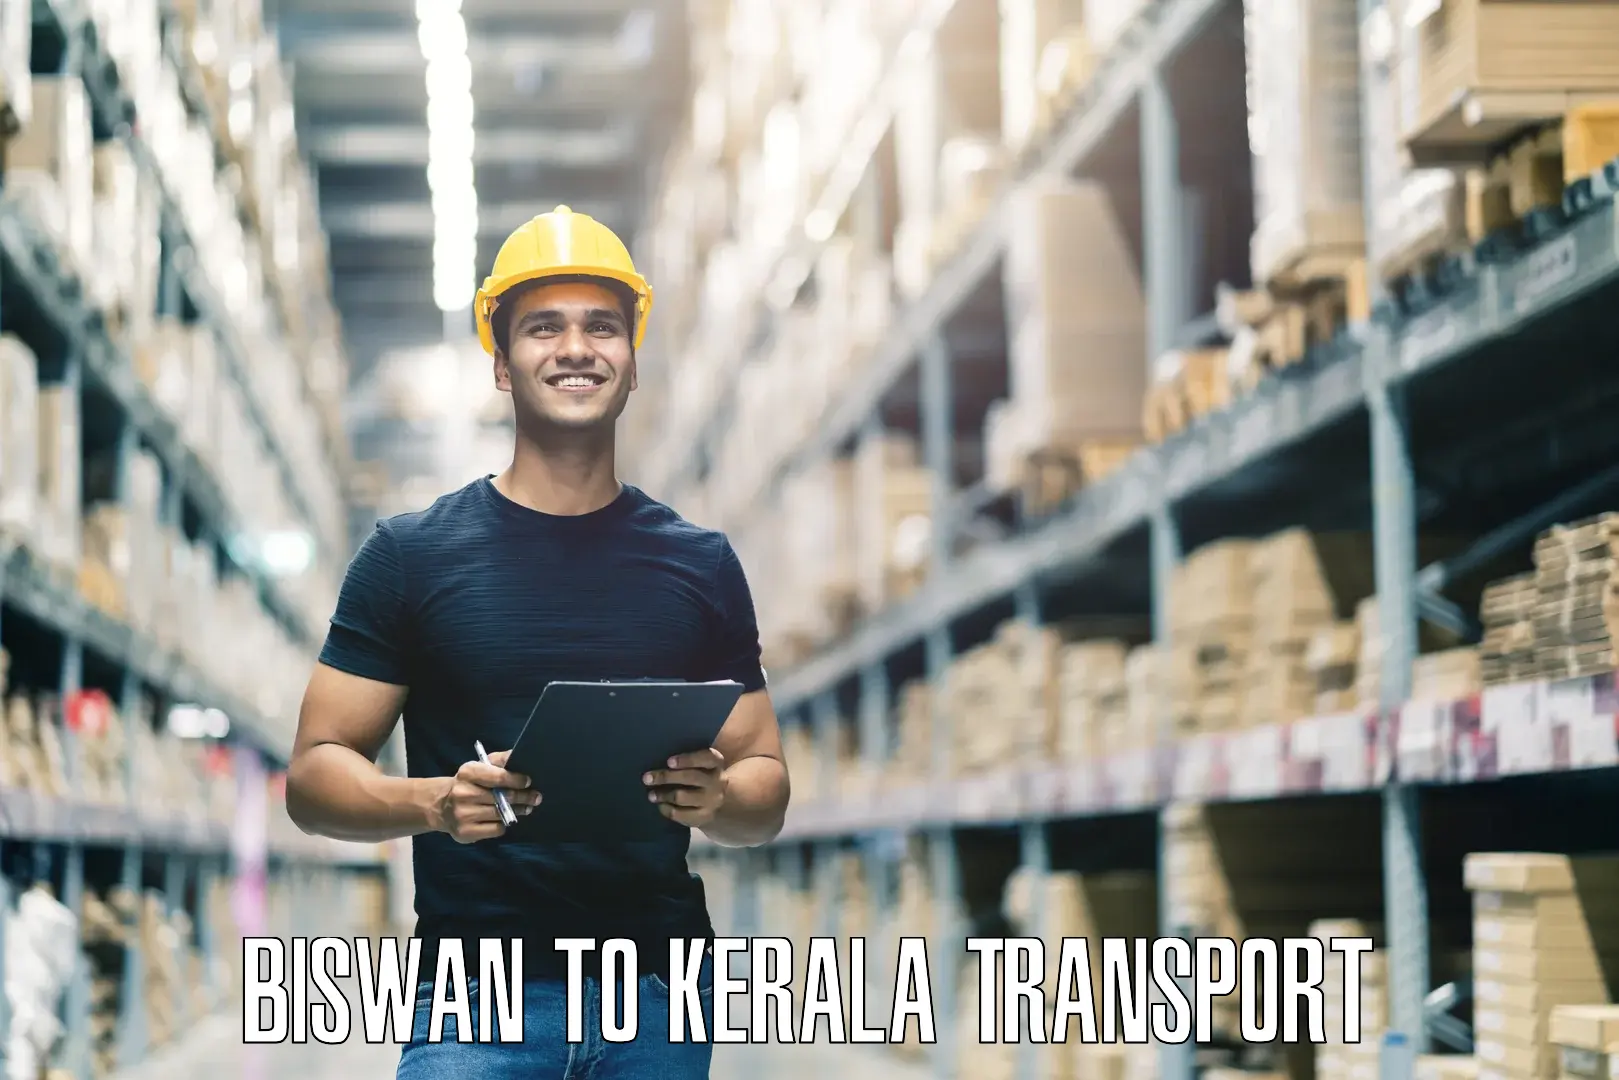 Truck transport companies in India Biswan to Pala